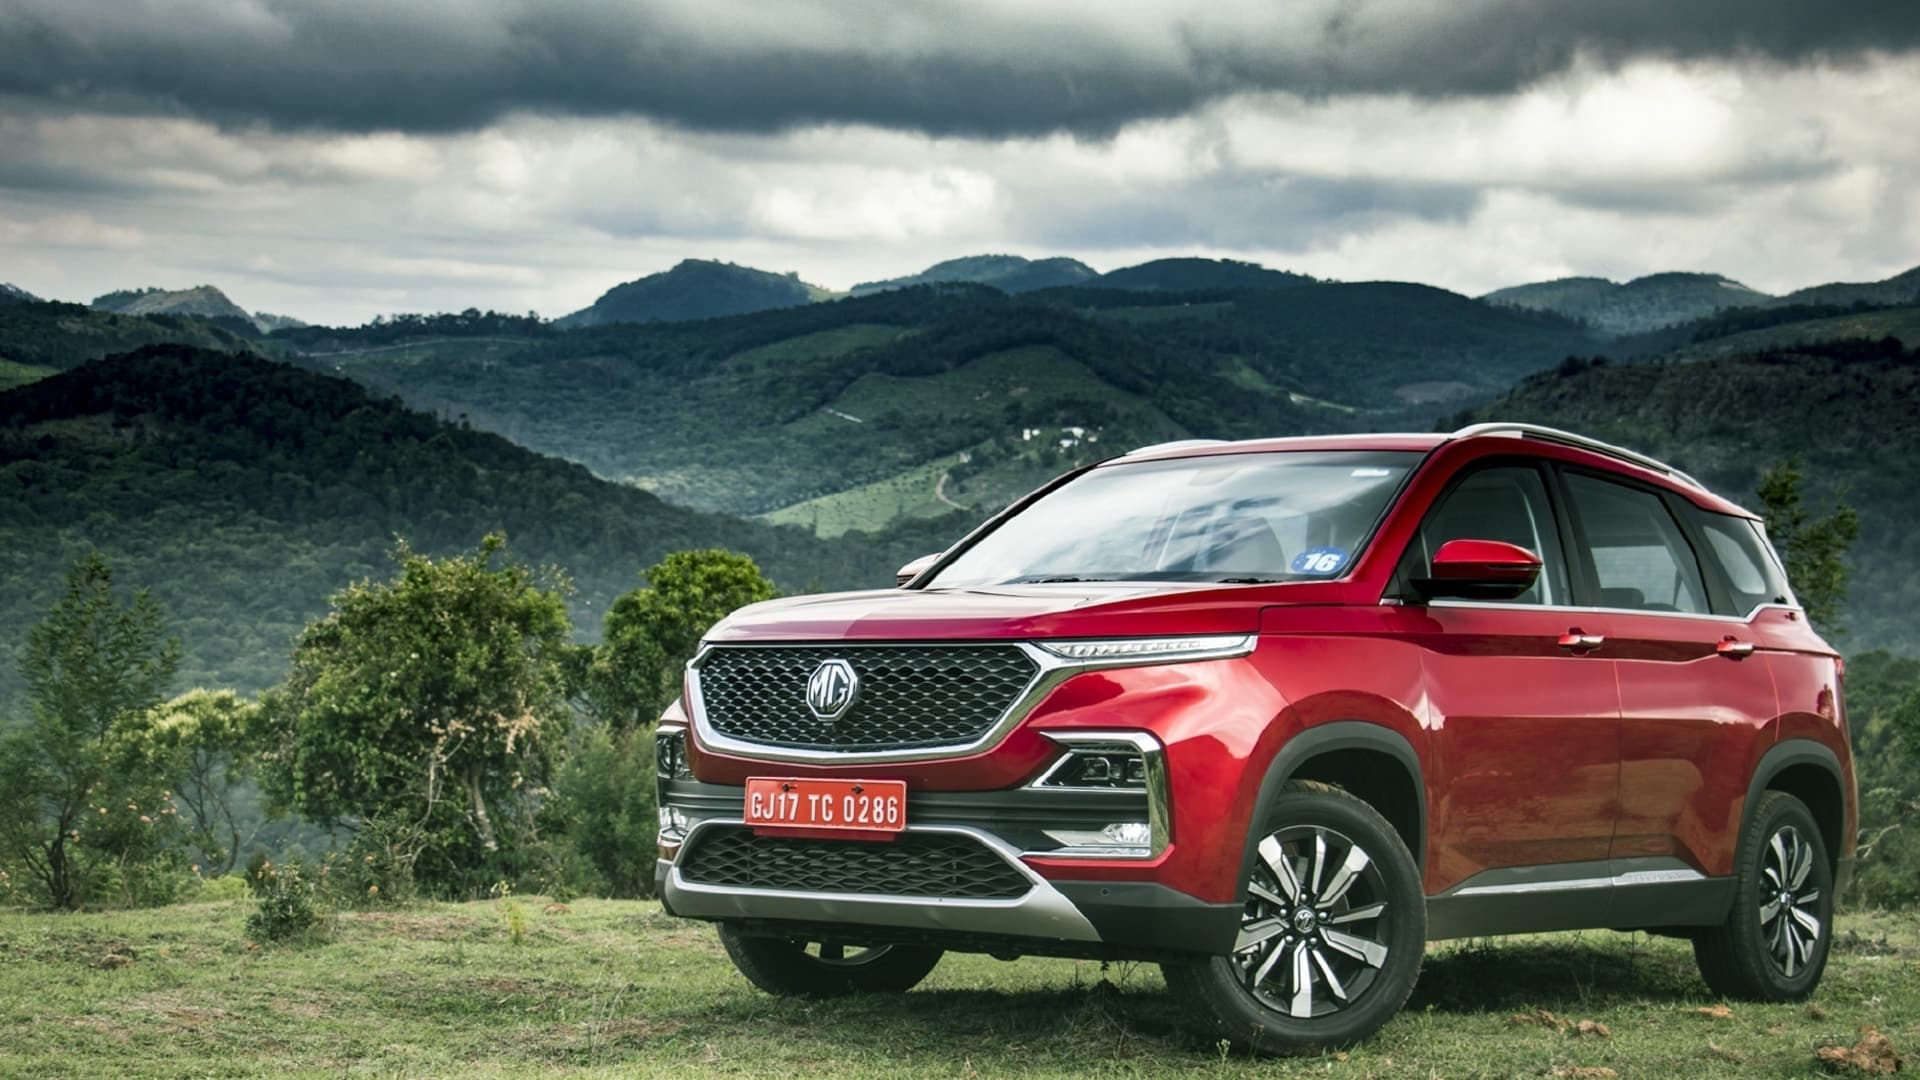 MG Motor ties up with Jio for connected features in its upcoming mid-size SUV